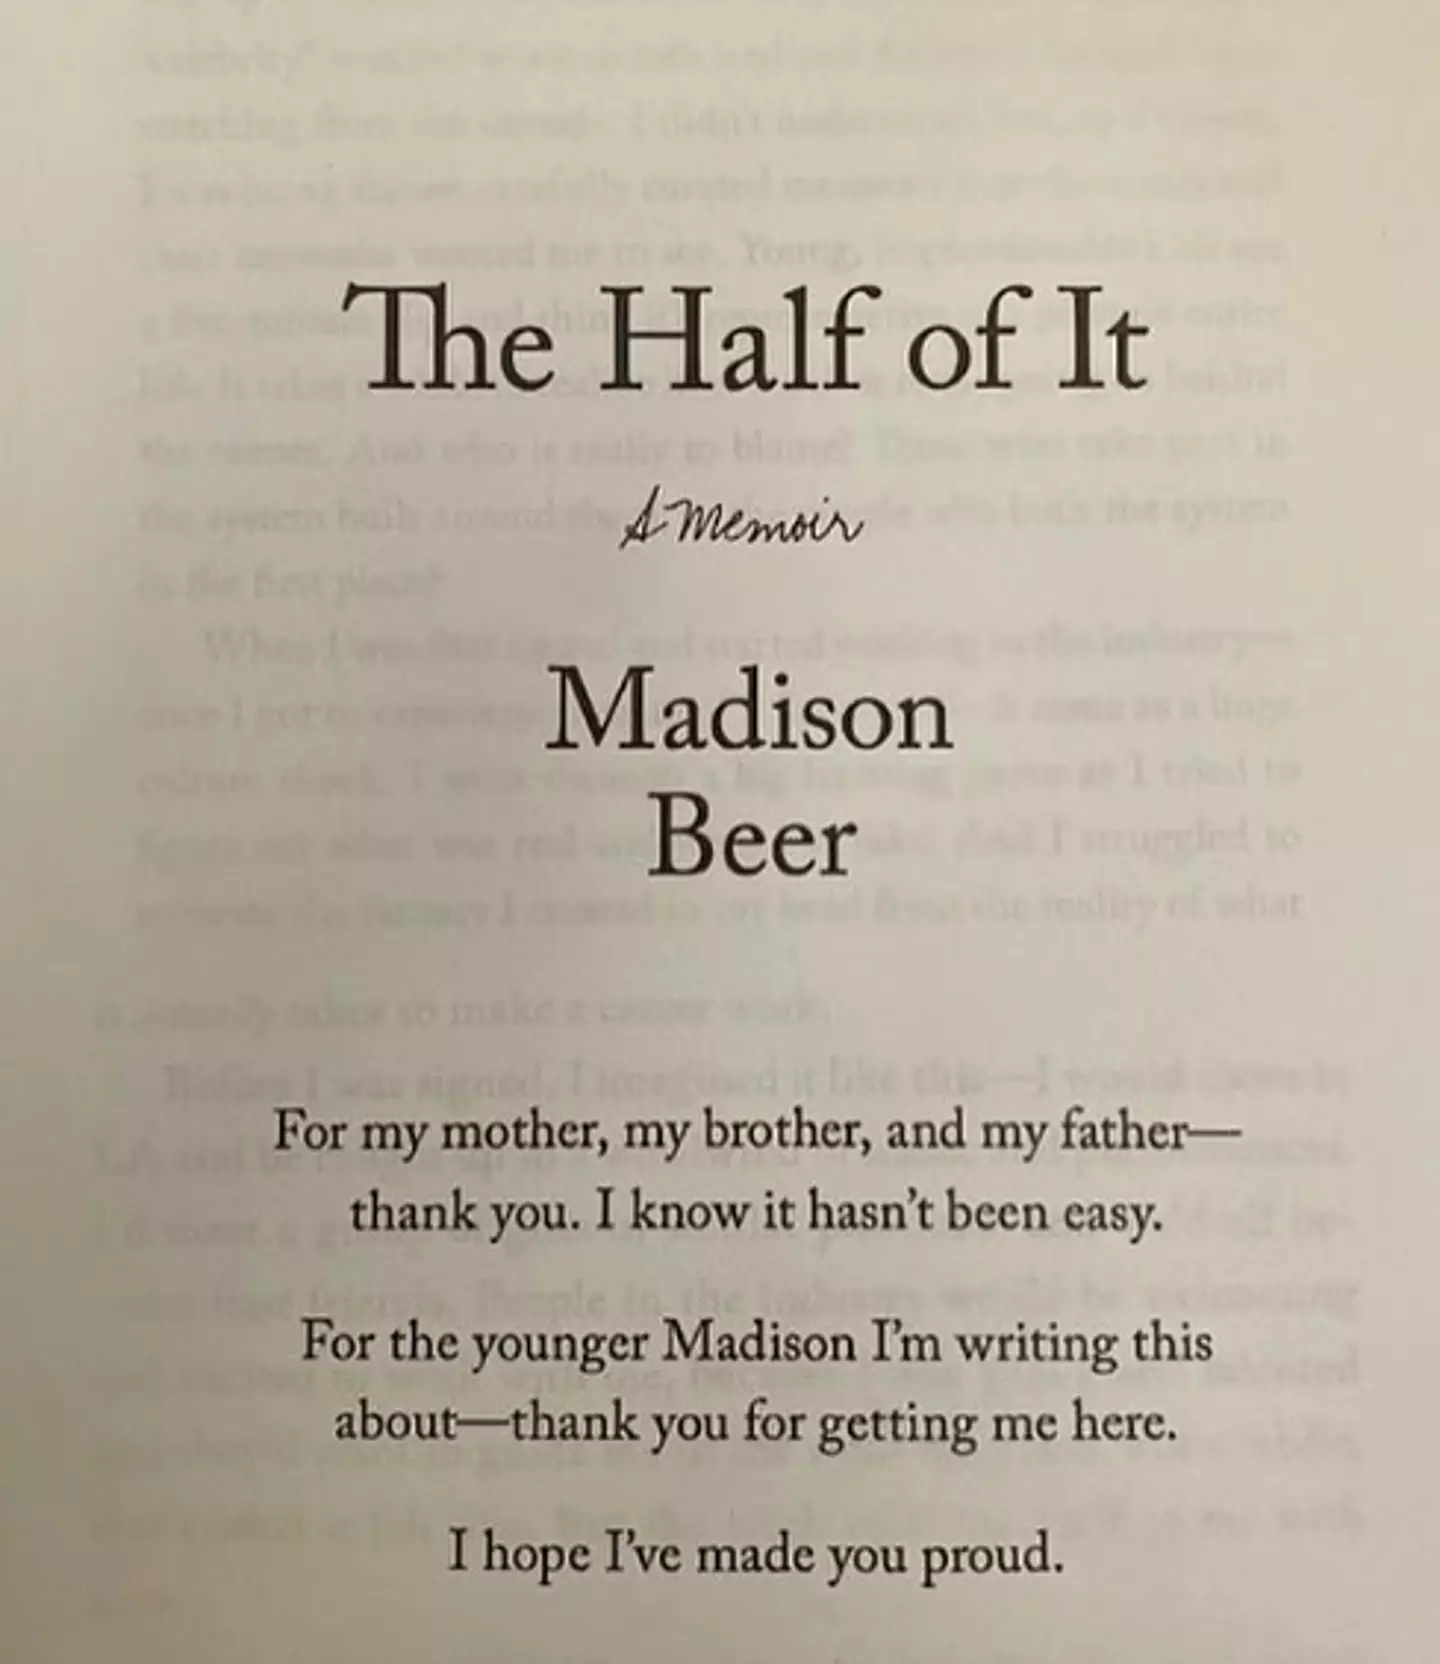 She dedicated the book to her family and younger self.